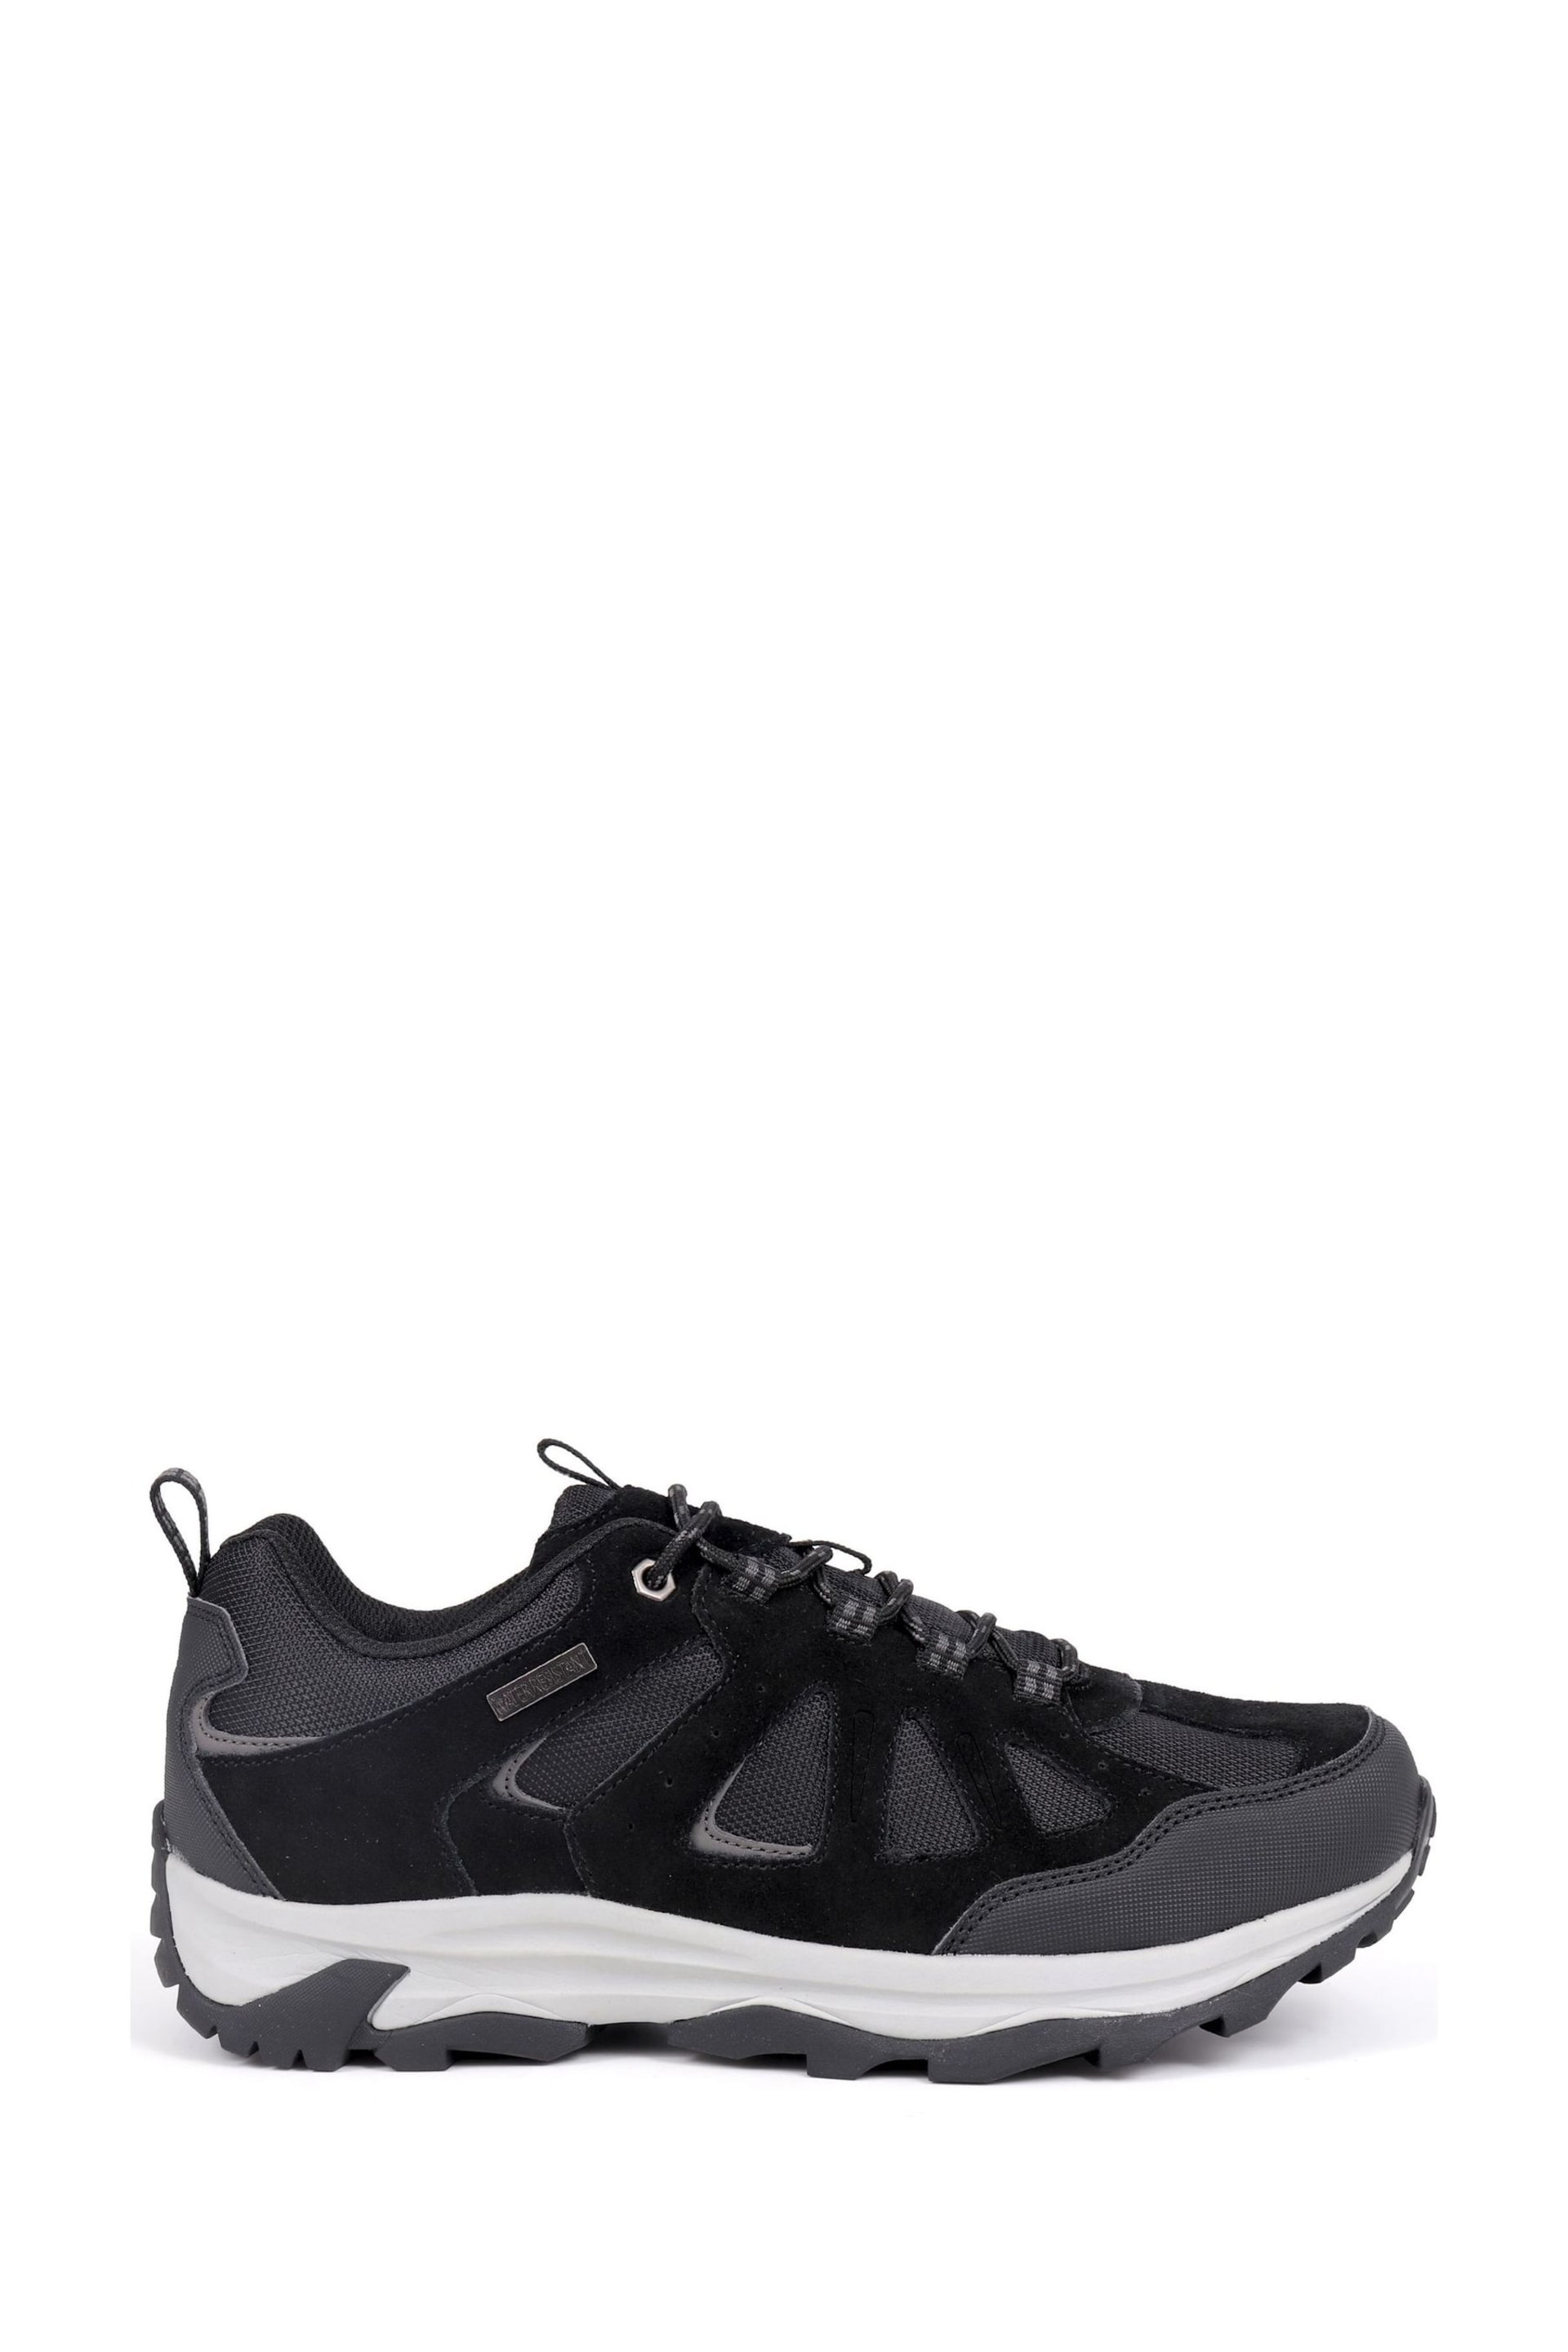 Pavers Leather Lace-Up Black Trainers - Image 2 of 5